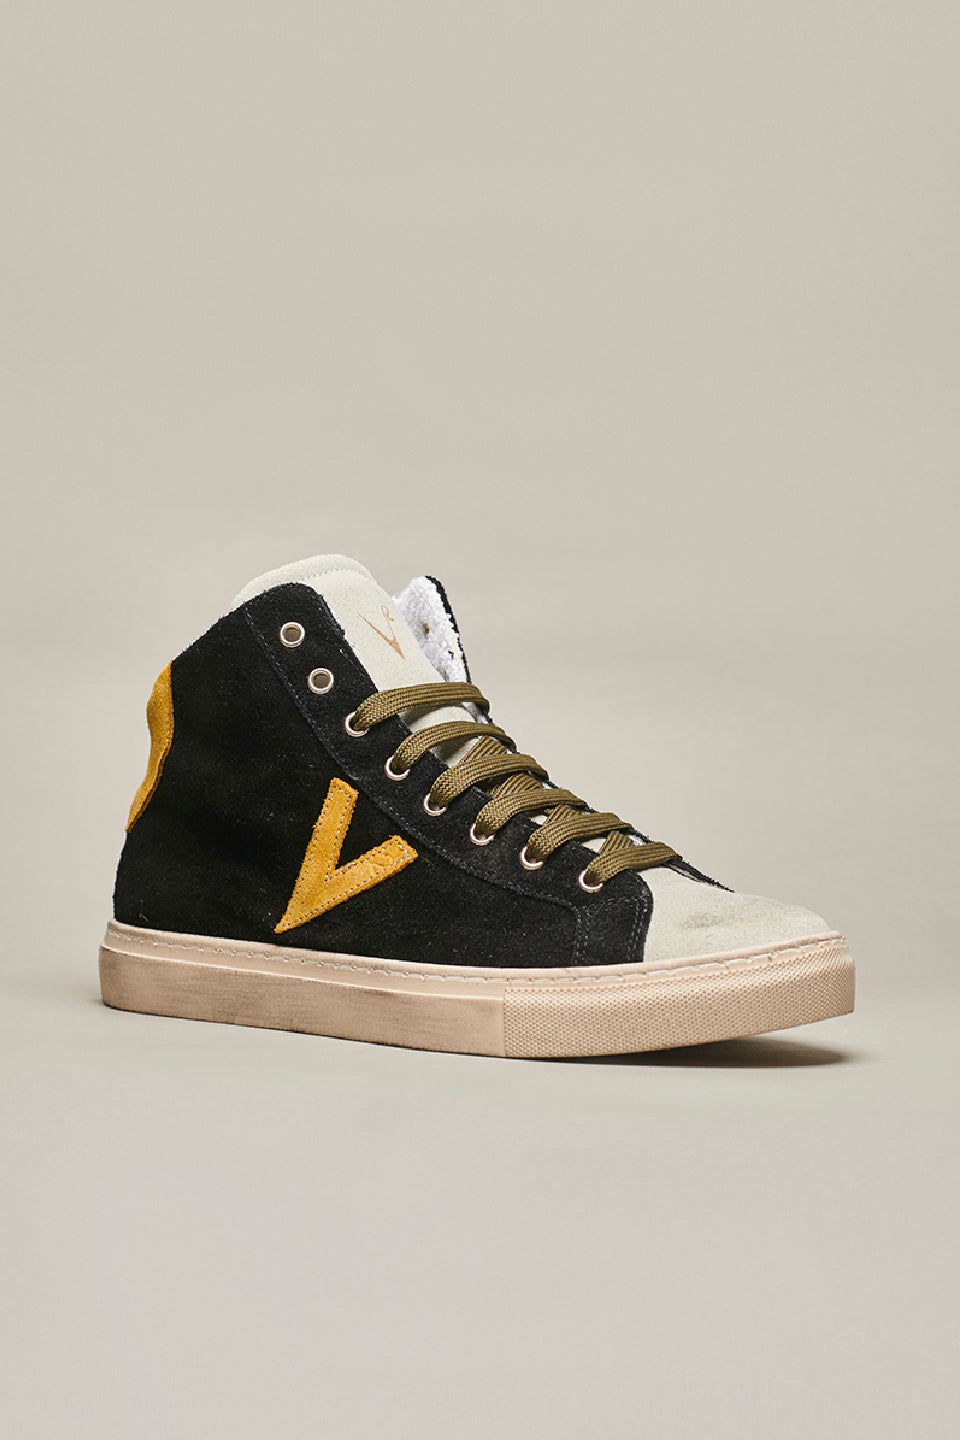 OLYMPIC MID- Black high sneakers with Mustard back and insert